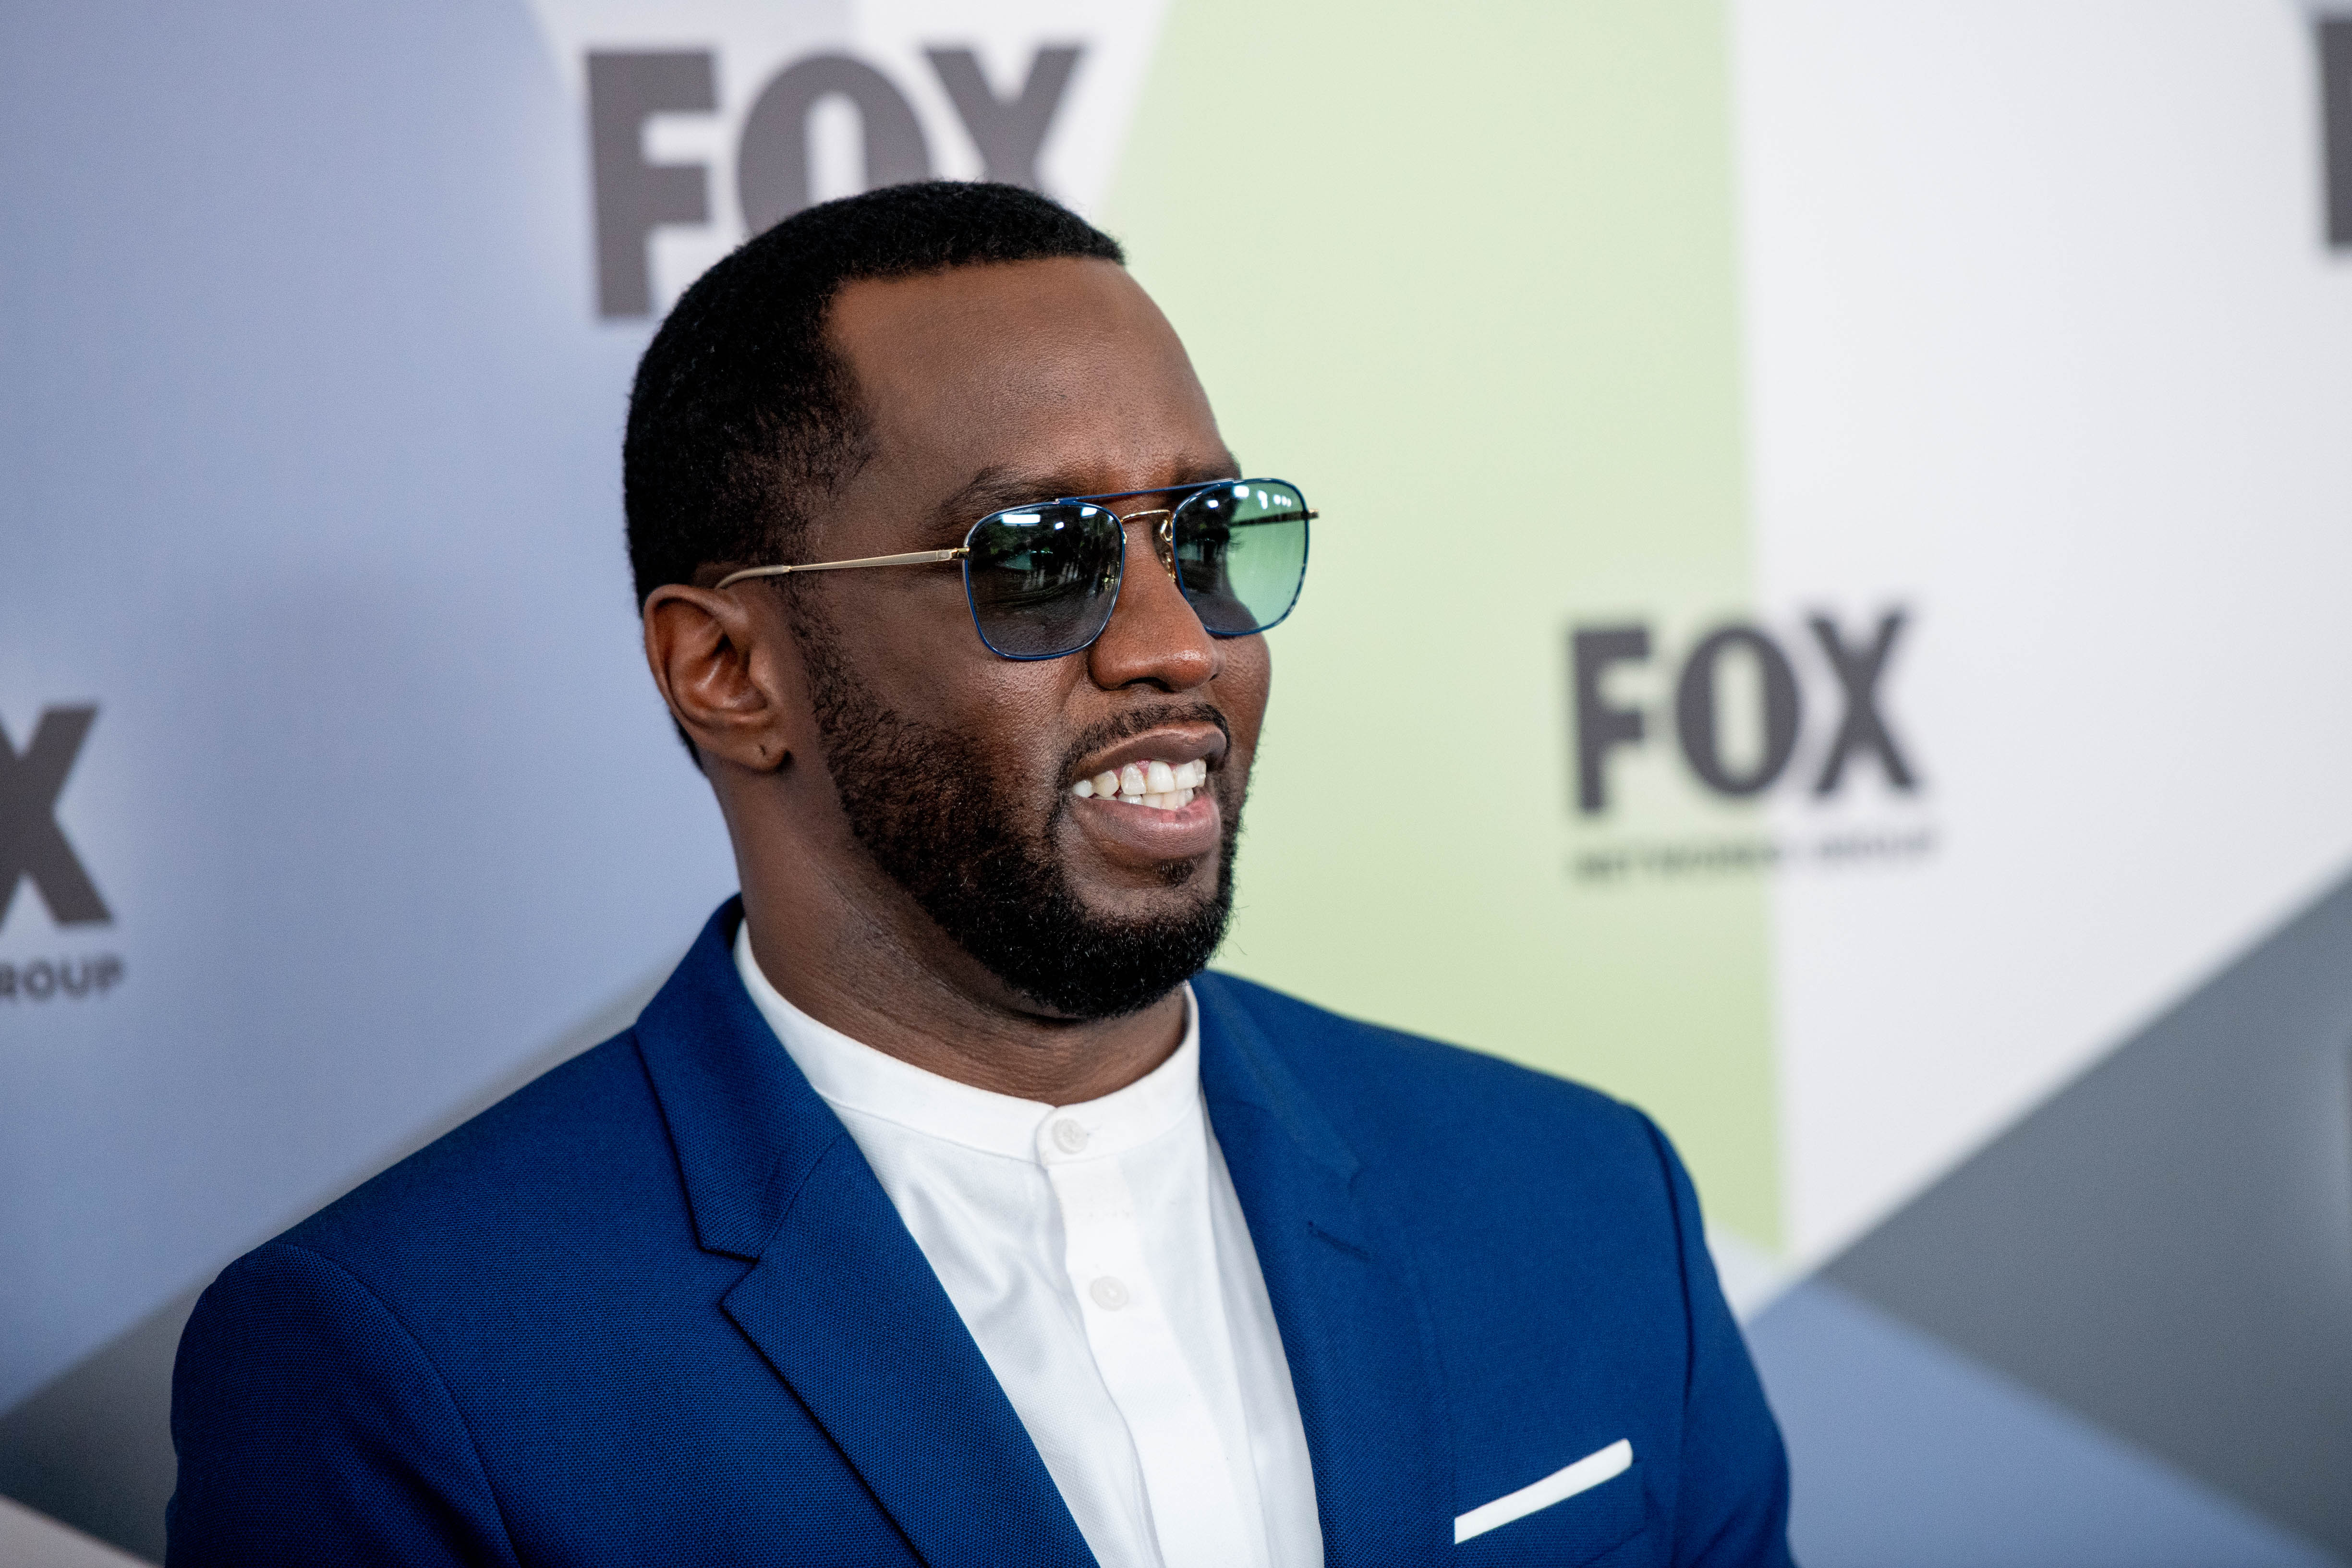 Sean 'Diddy' Combs at the 2018 Fox Network Upfront at Wollman Rink, Central Park on May 14, 2018 in New York City. | Photo: Getty Images